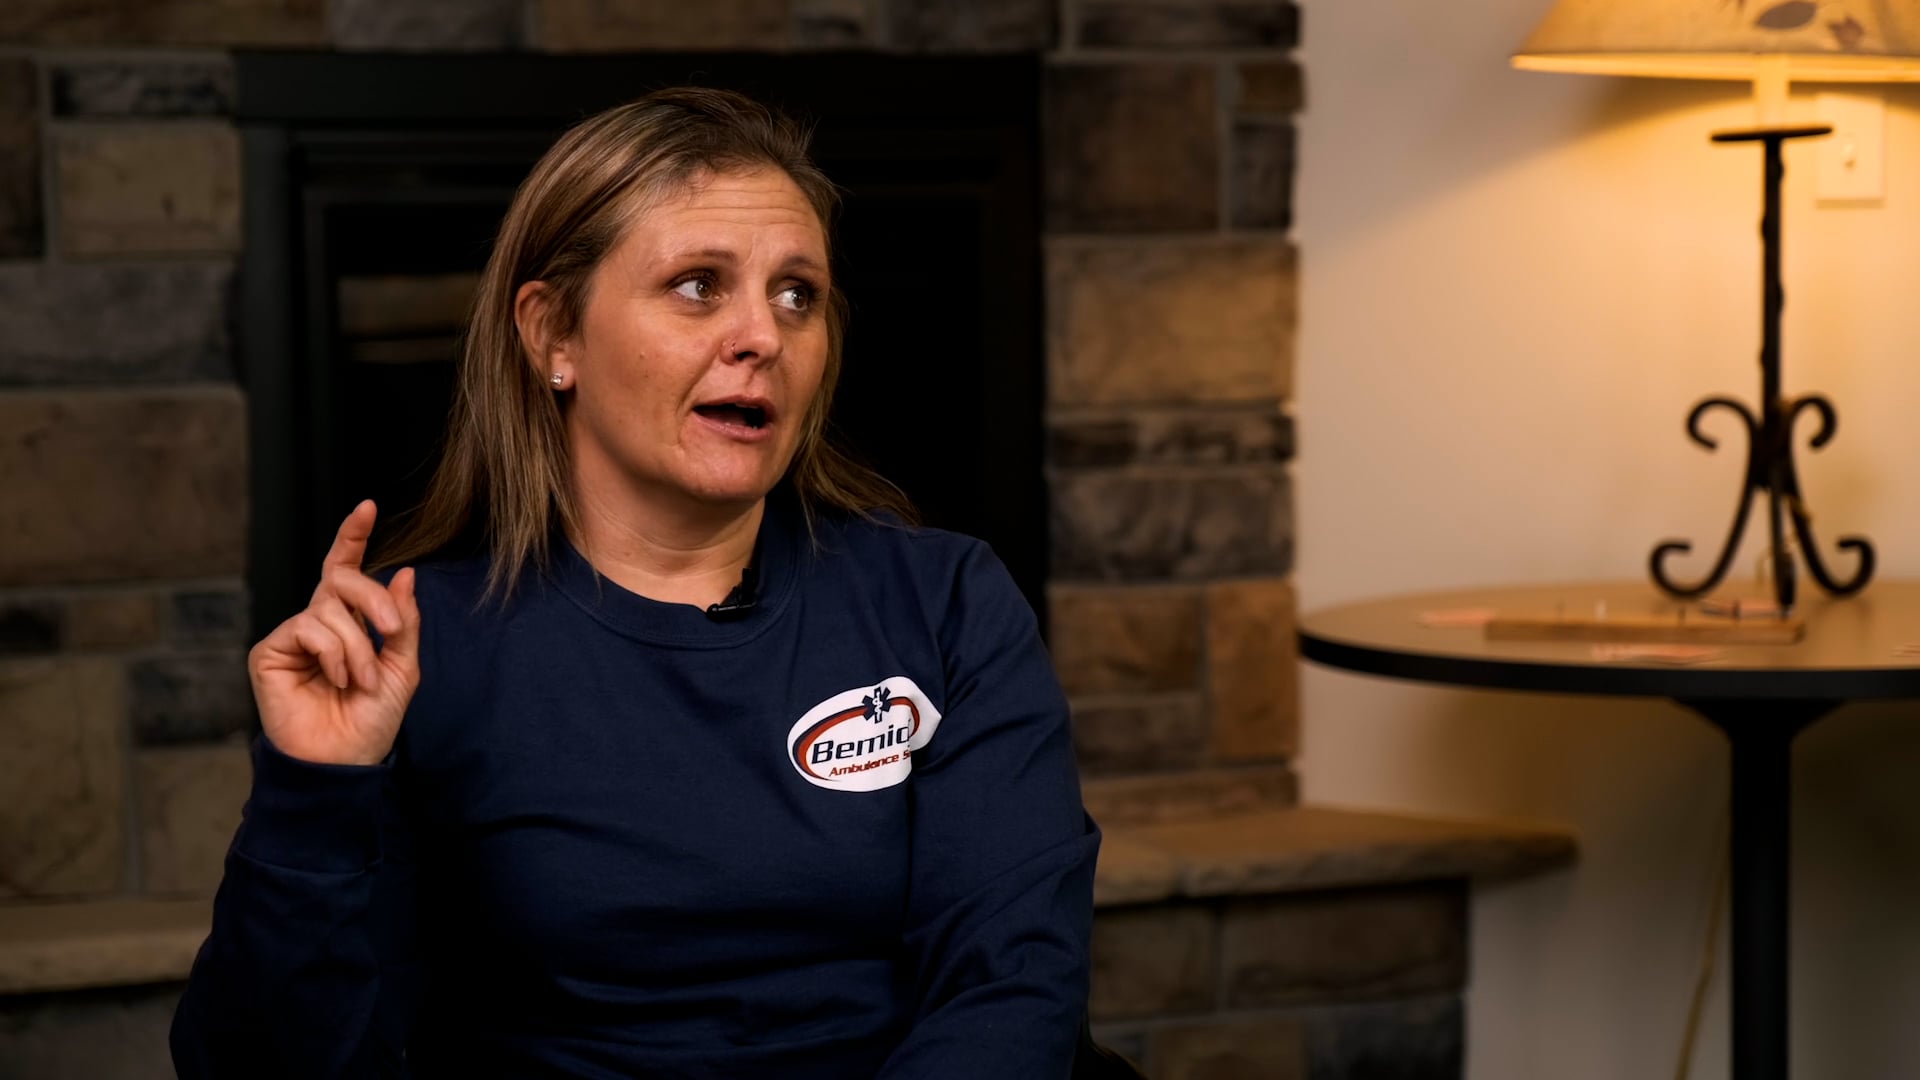 Lisa chats about her EMS career